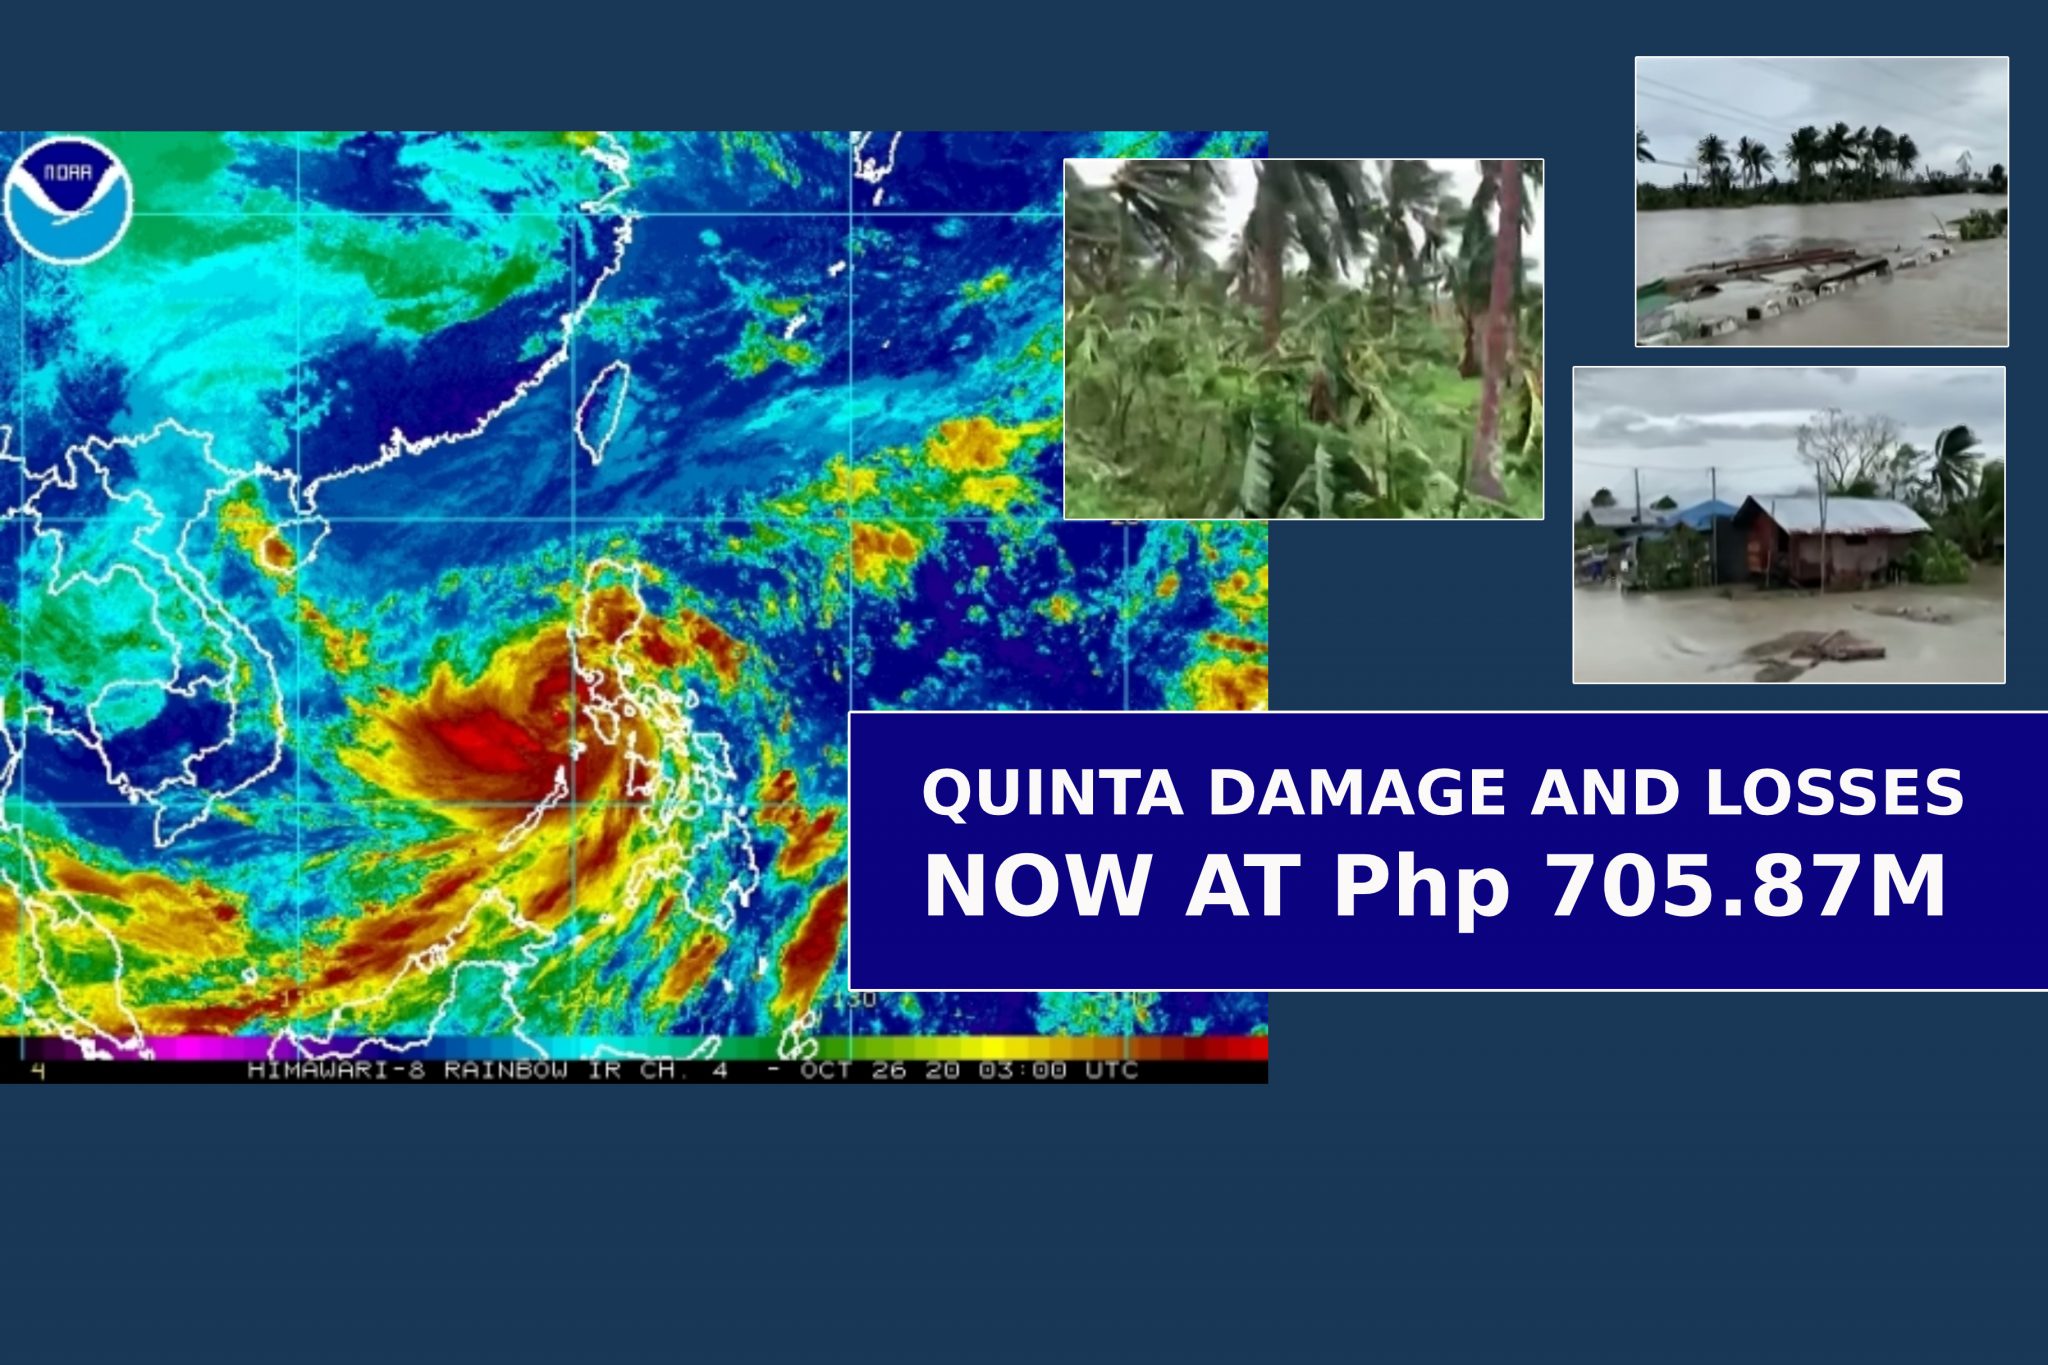 “Quinta” damage and losses now at Php 705.87M; DA to allocate Php 795M QRF for affected areas